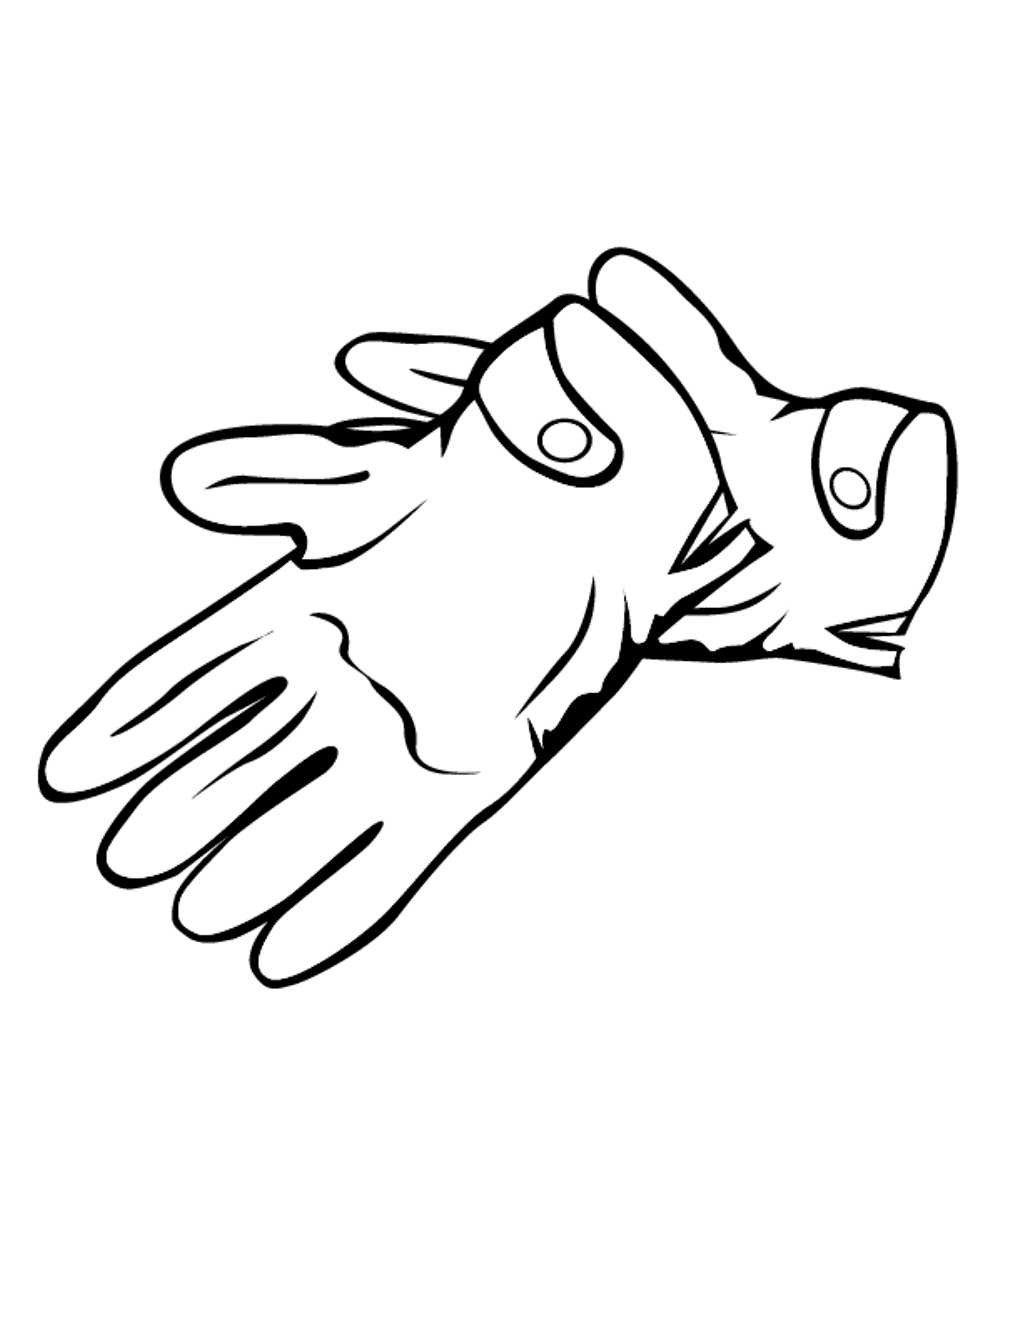 Coloring Pages Winter Gloves | Winter Coloring pages of ...